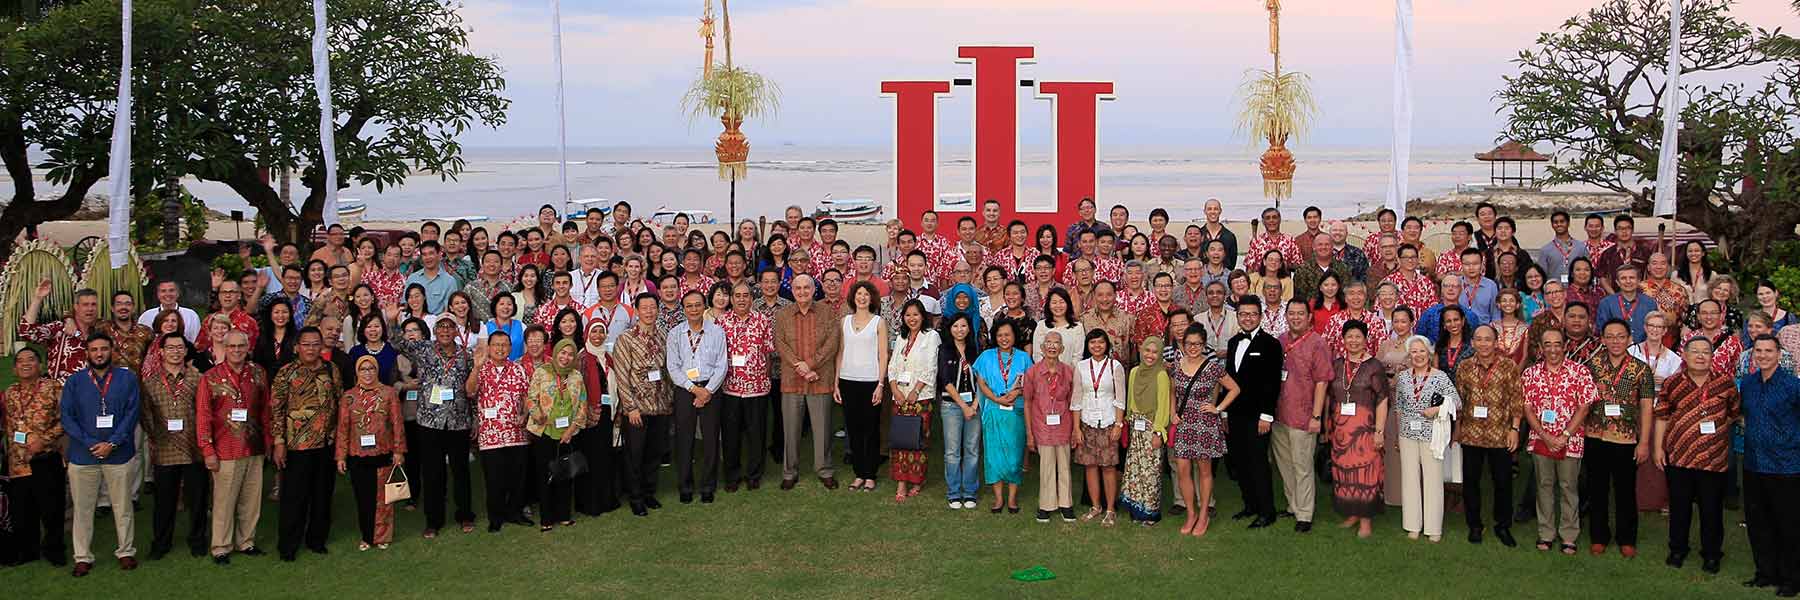 Conference attendees standing outside in front of a giant IU trident.